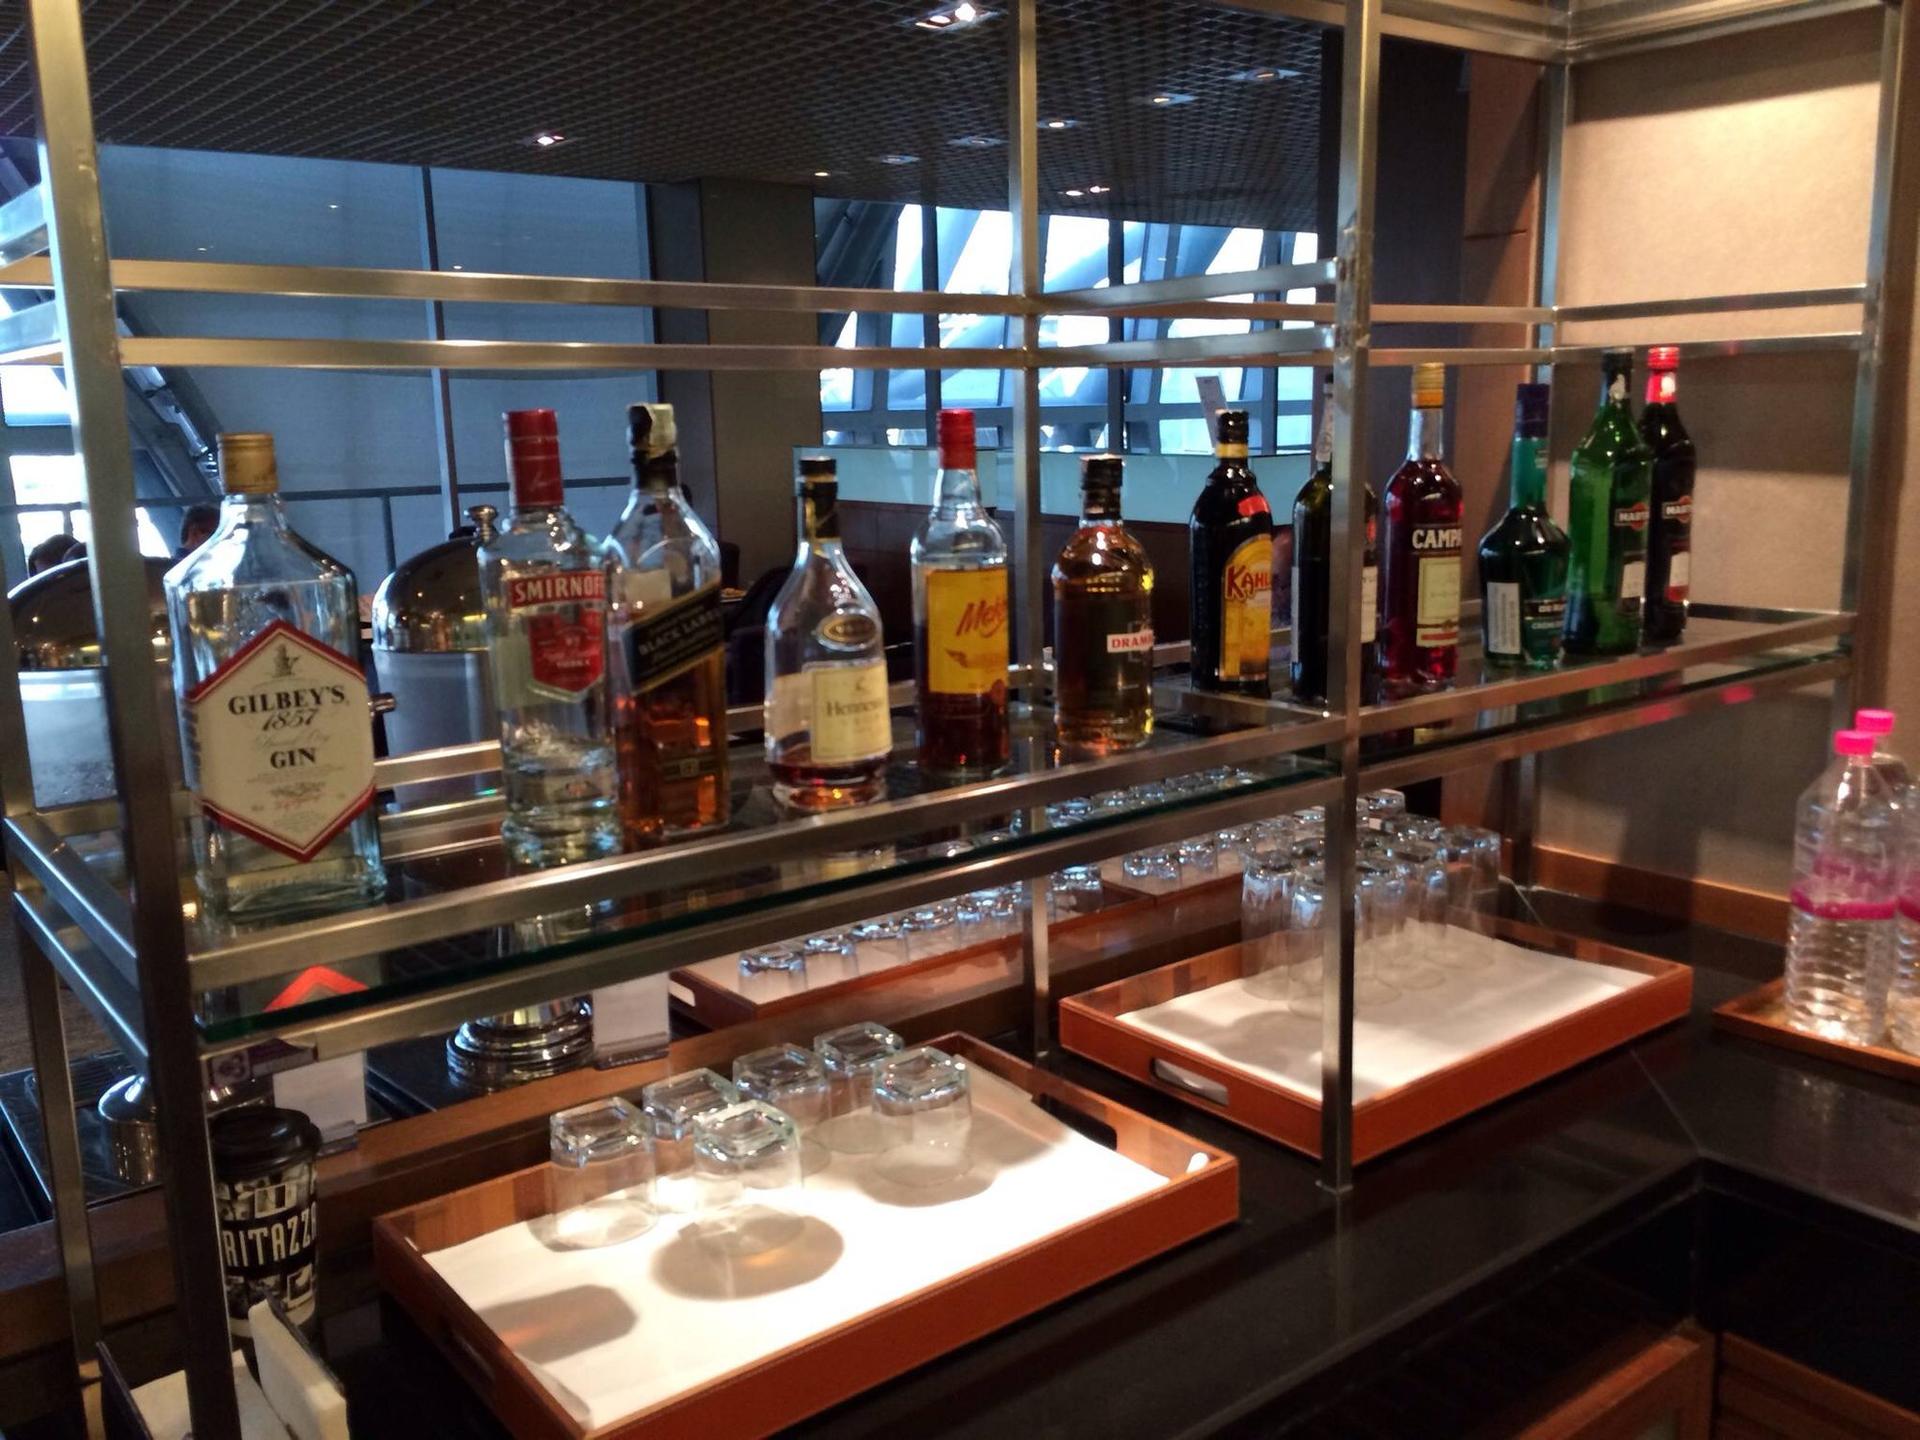 Thai Airways Royal Orchid Lounge image 12 of 15